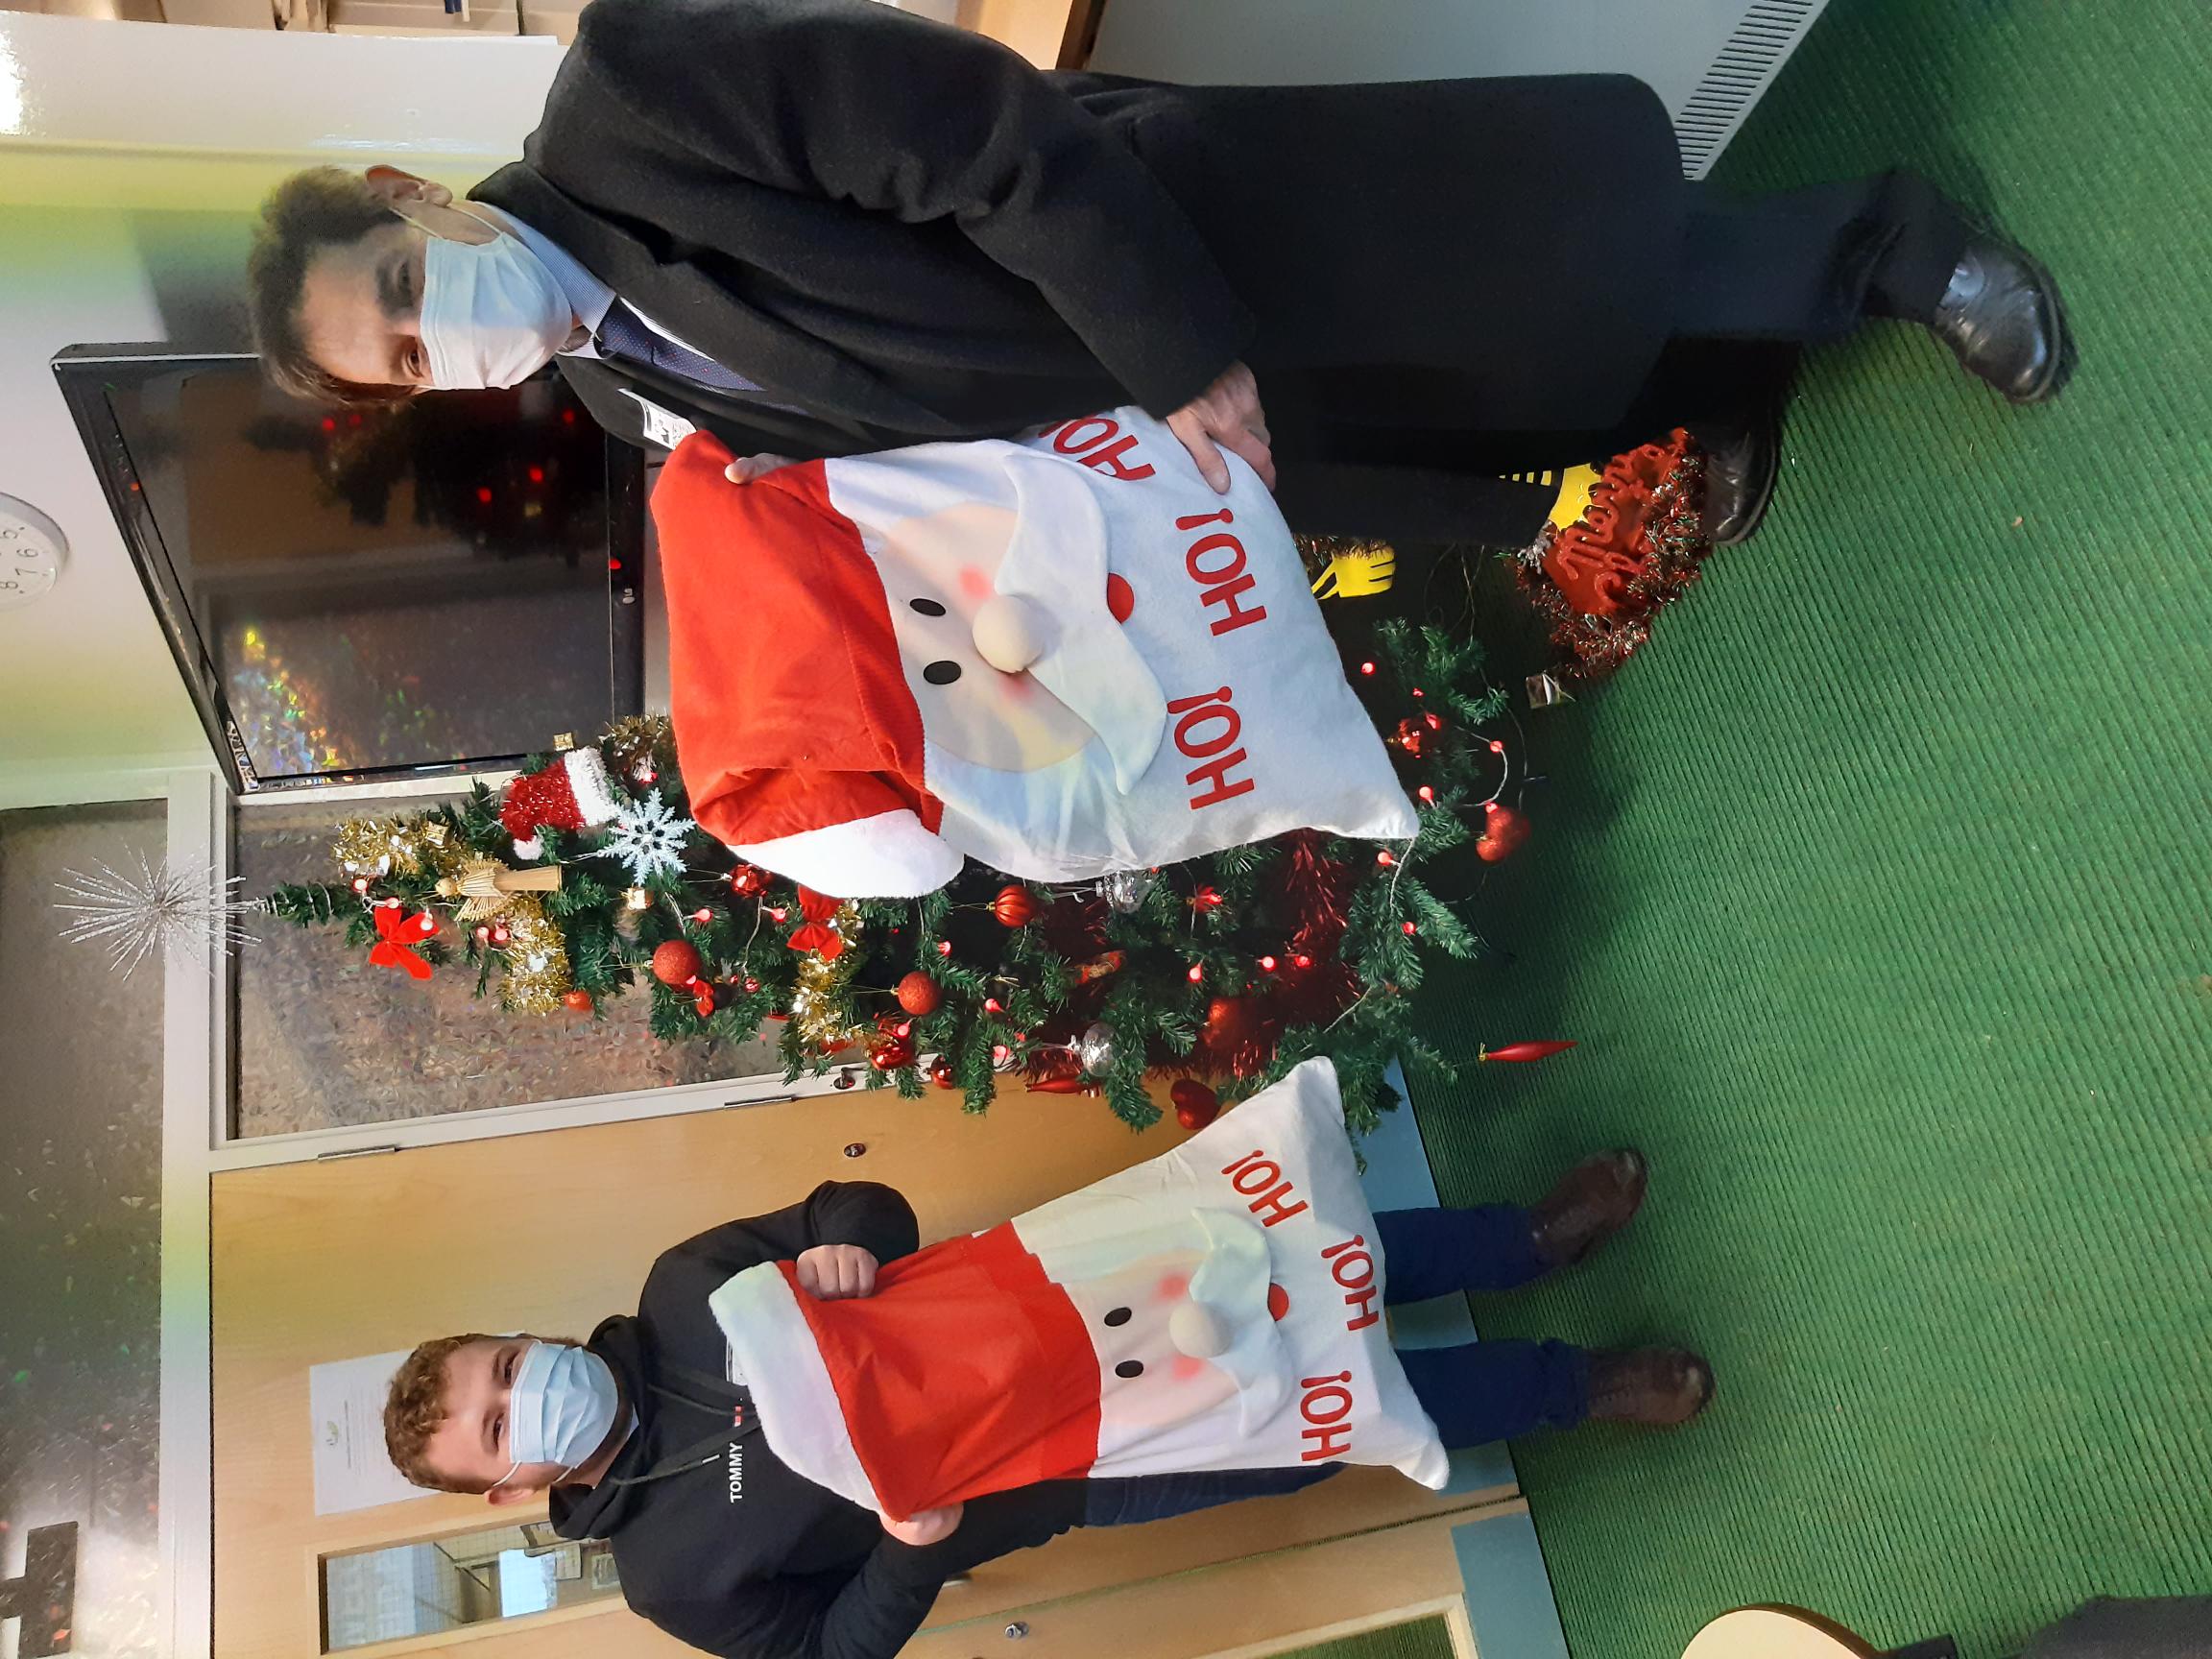 Bramley and Ravenfield ward Councillors Lewis Mills and Greg Reynolds drop Christmas presents off for pupils at Ravenfield Primary School